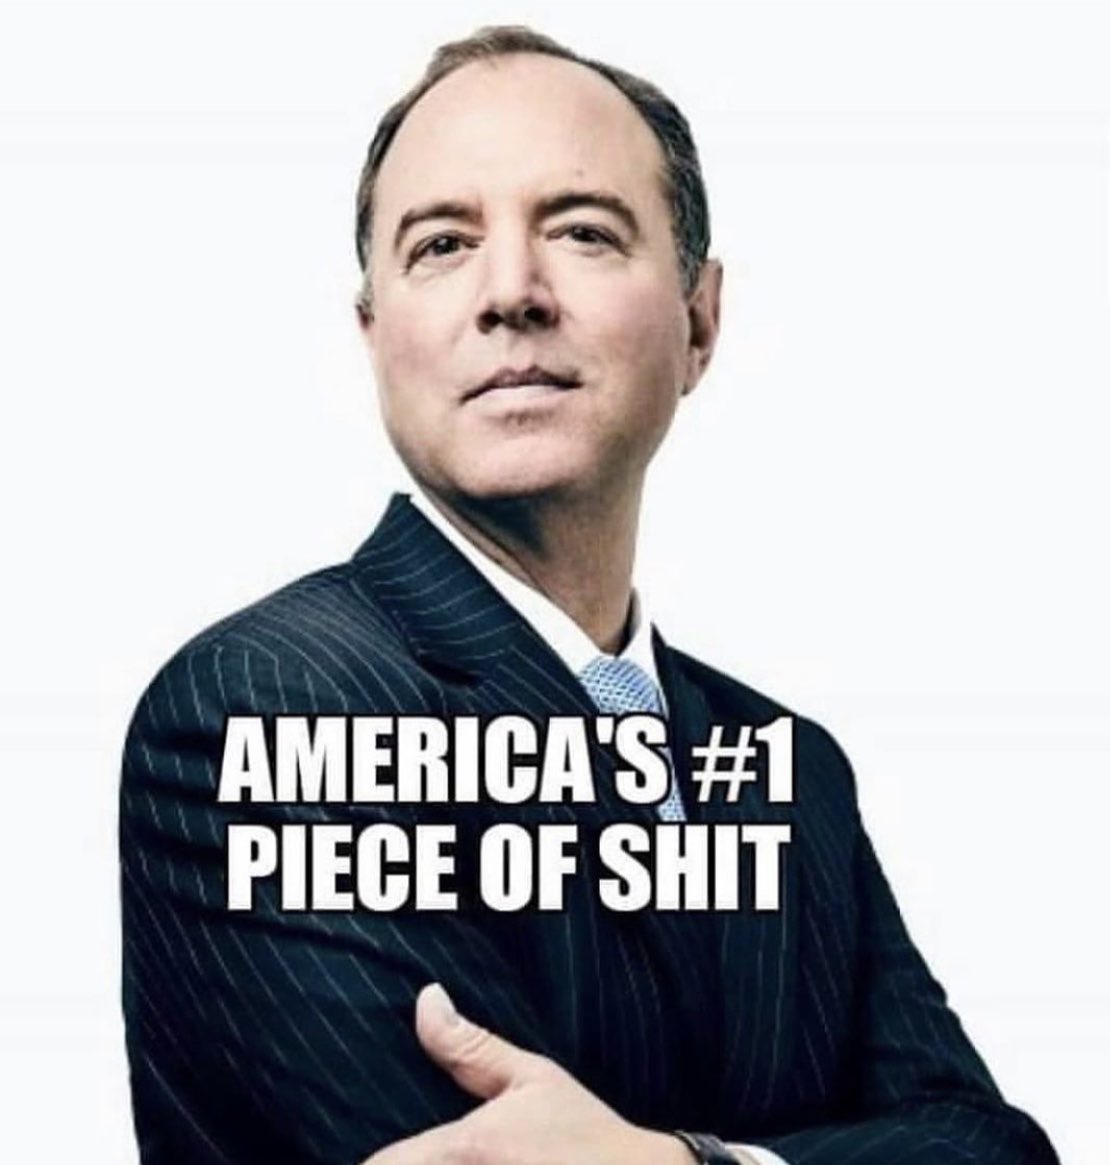 This congenital liar and despicable huckster must not be allowed in the US Senate. If it's Schiff , flush it.